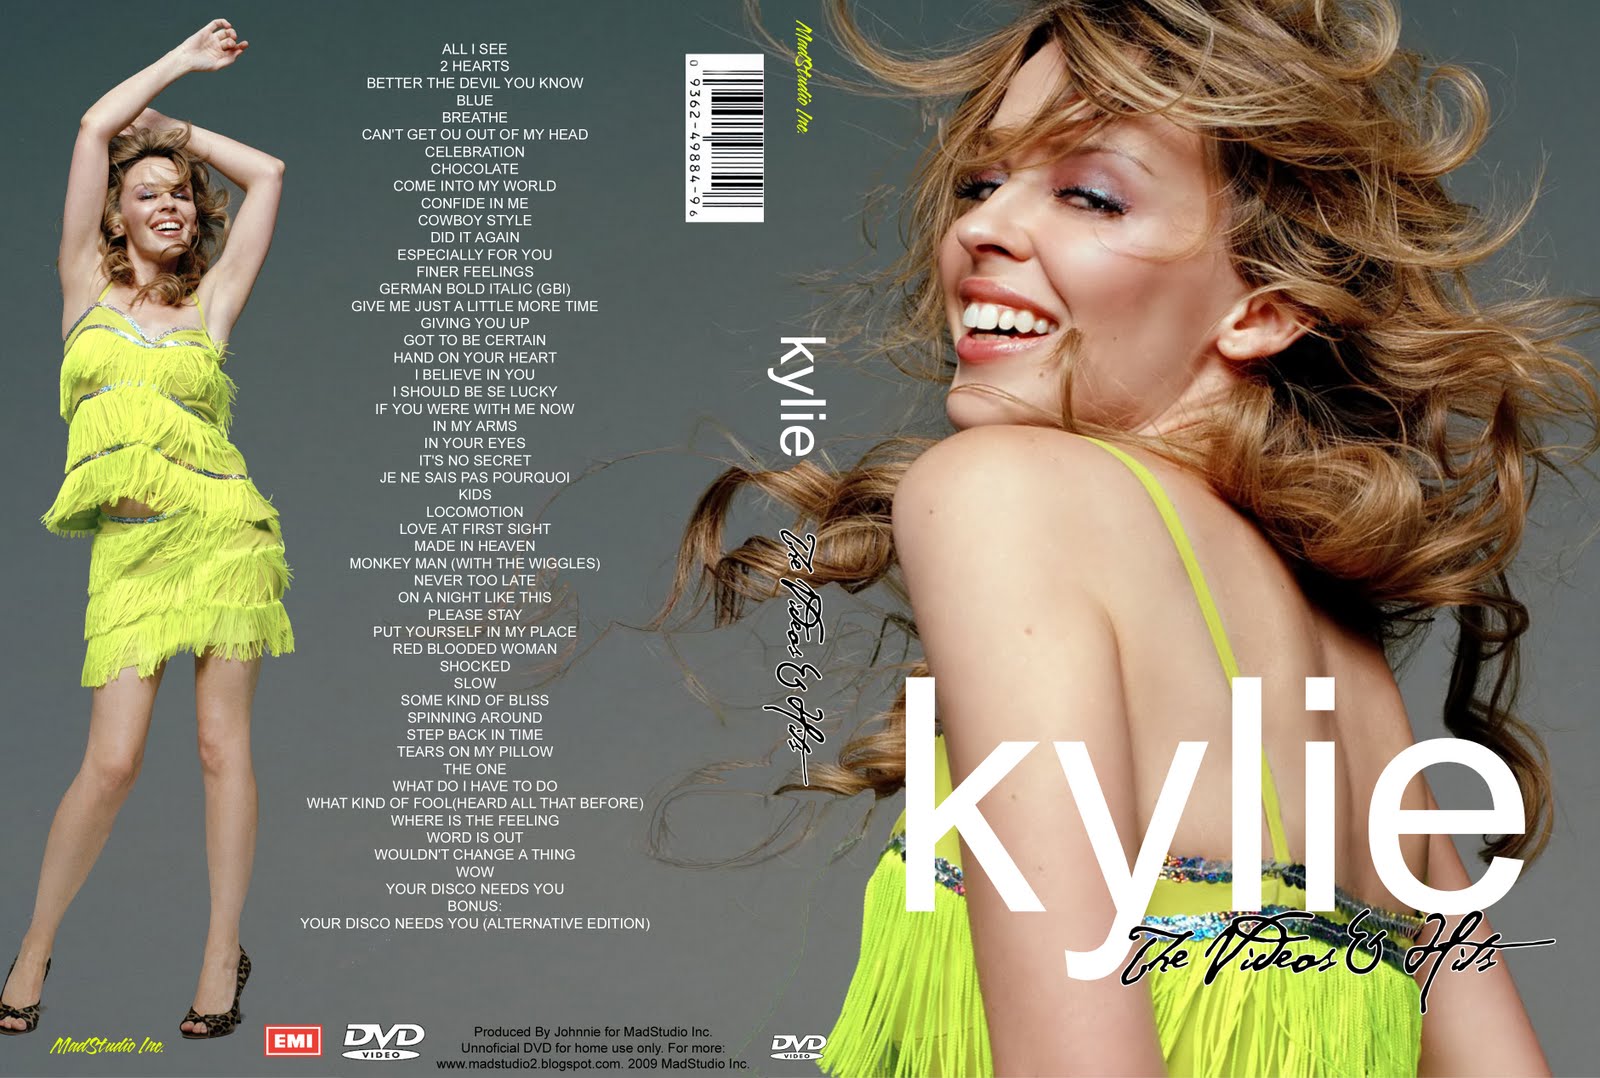 Jaquette DVD Kylie Minogue Full videographie 1987-2008 custom